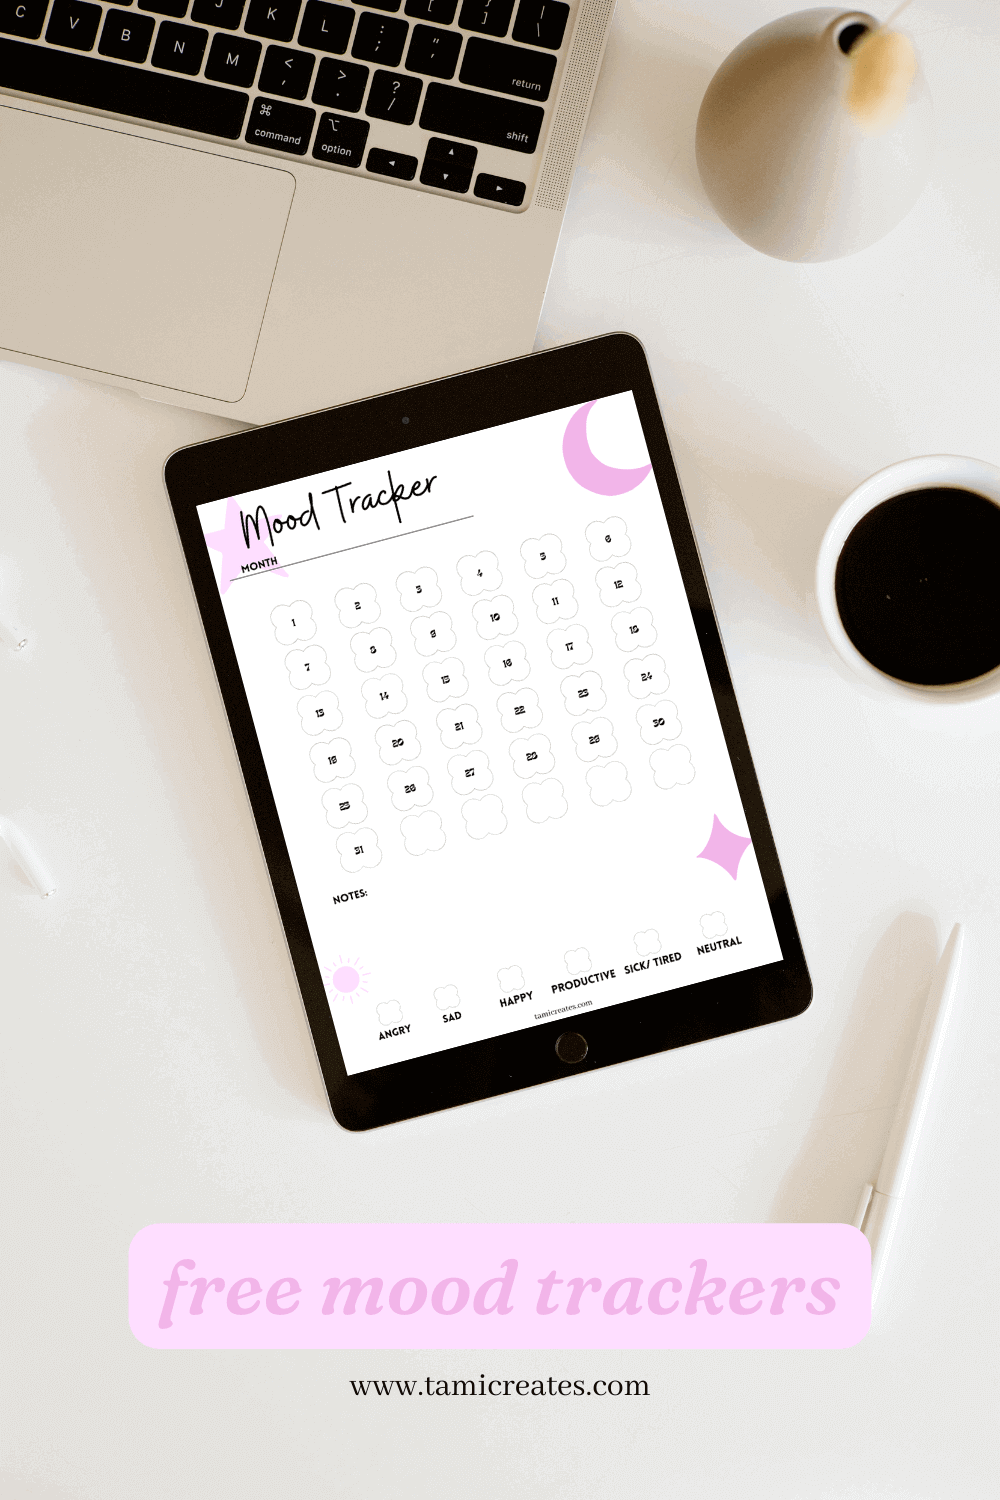 Mood trackers can benefit your mental health in so many different ways. Here are 2 printable free mood trackers for better mental health!